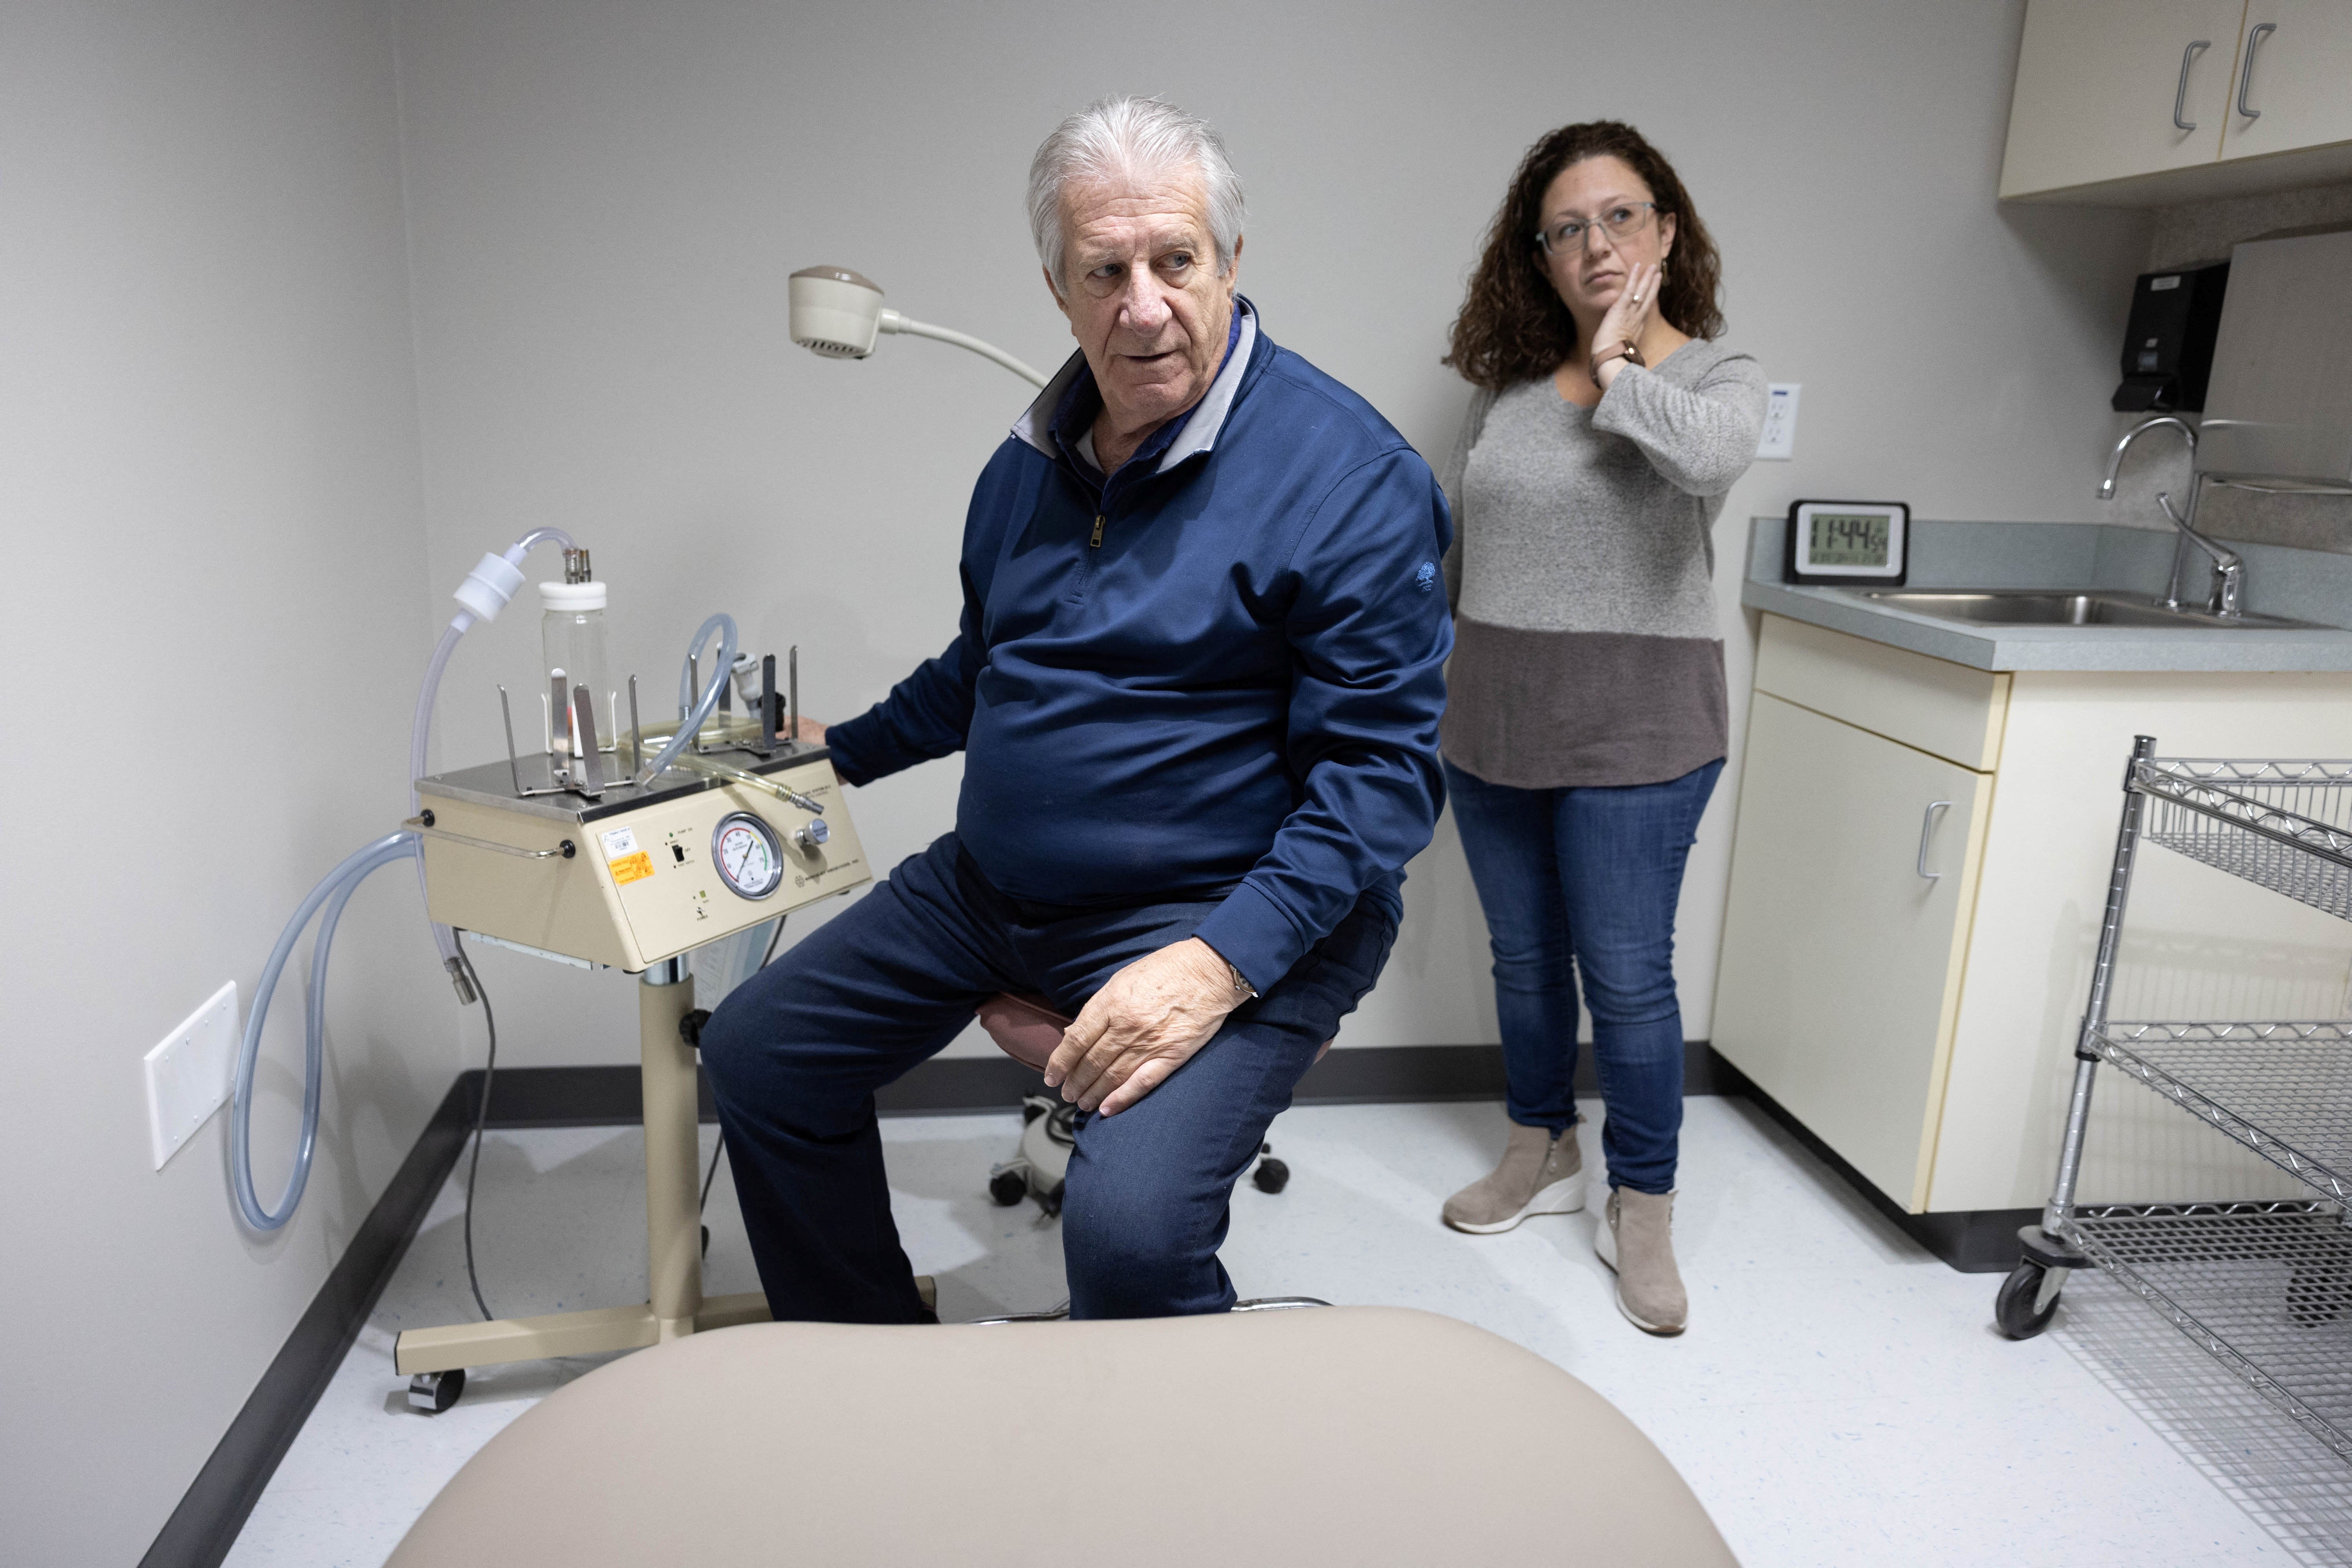 Dr Alan Braid, 78, and his daughter and clinic manager Andrea Gallegos, 40, set up an exam room at Alamo Women’s Clinic in Carbondale, Illinois